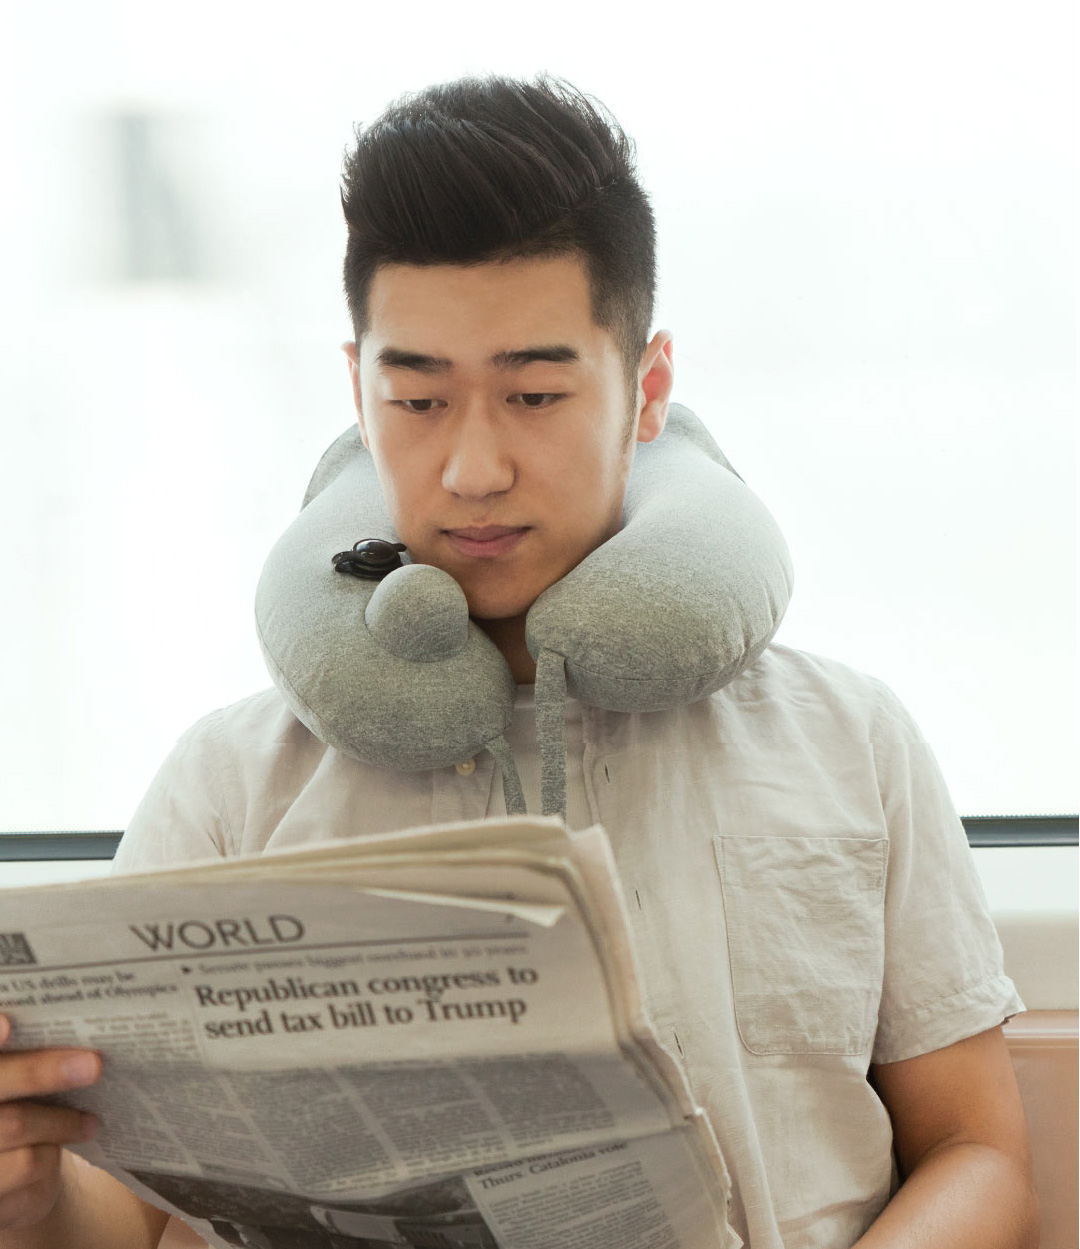 Xiaomi Ardor Inflatable Neck Pillow With Hoodie